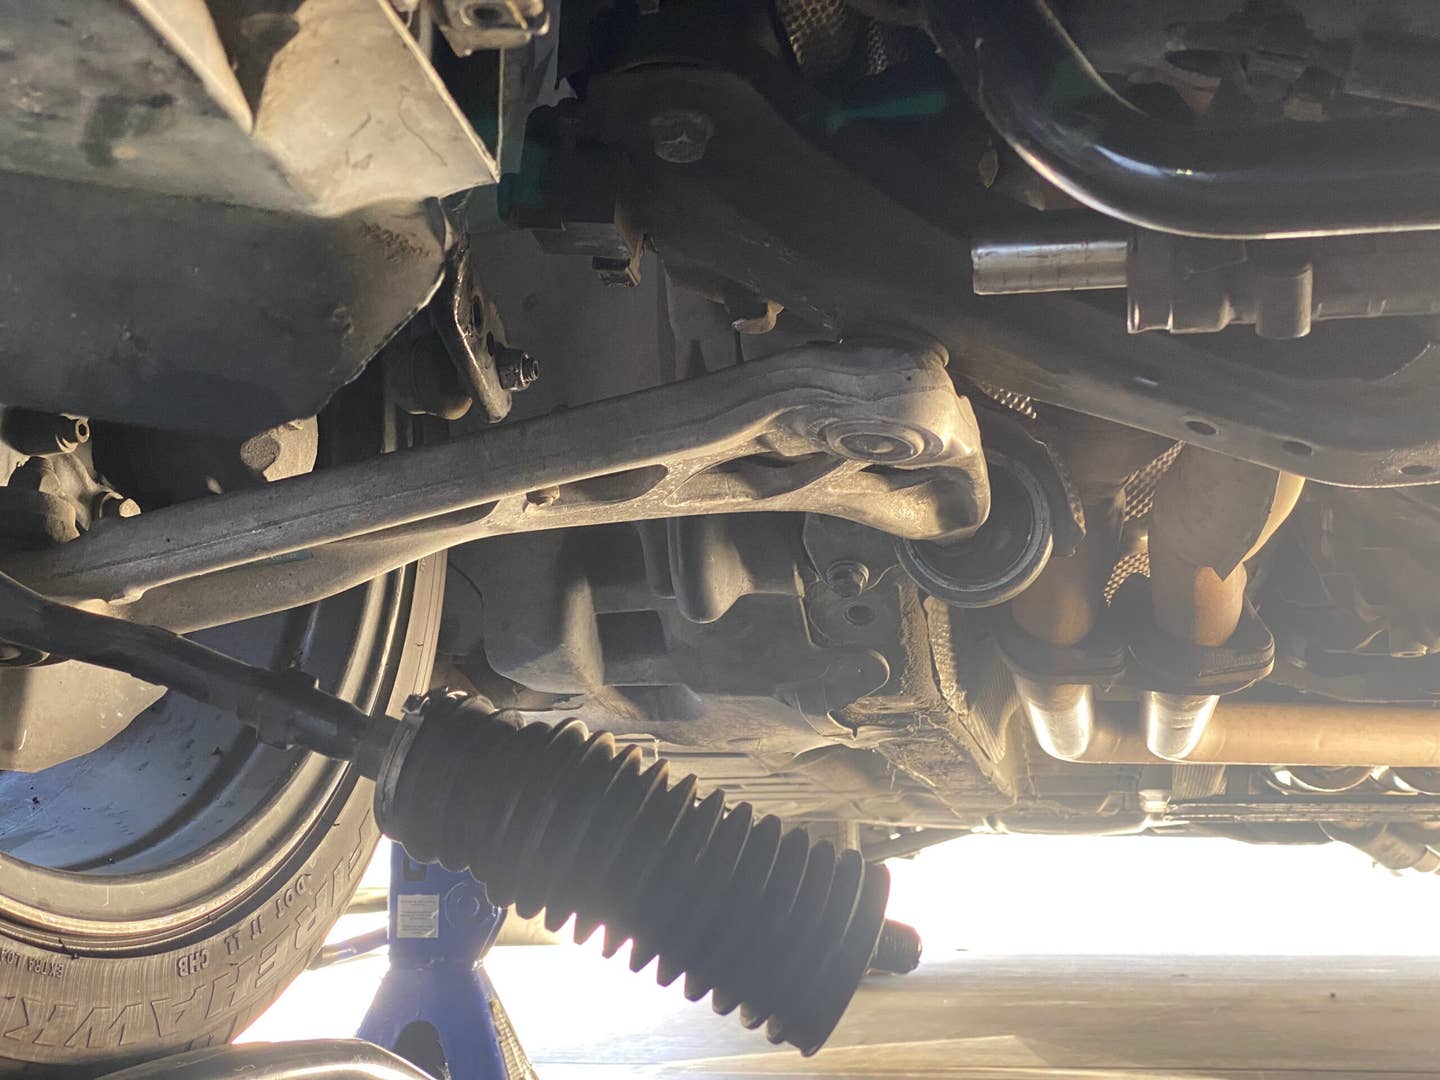 The underside of a BMW E46. The tie rod is hanging down, disconnected from the steering rack.